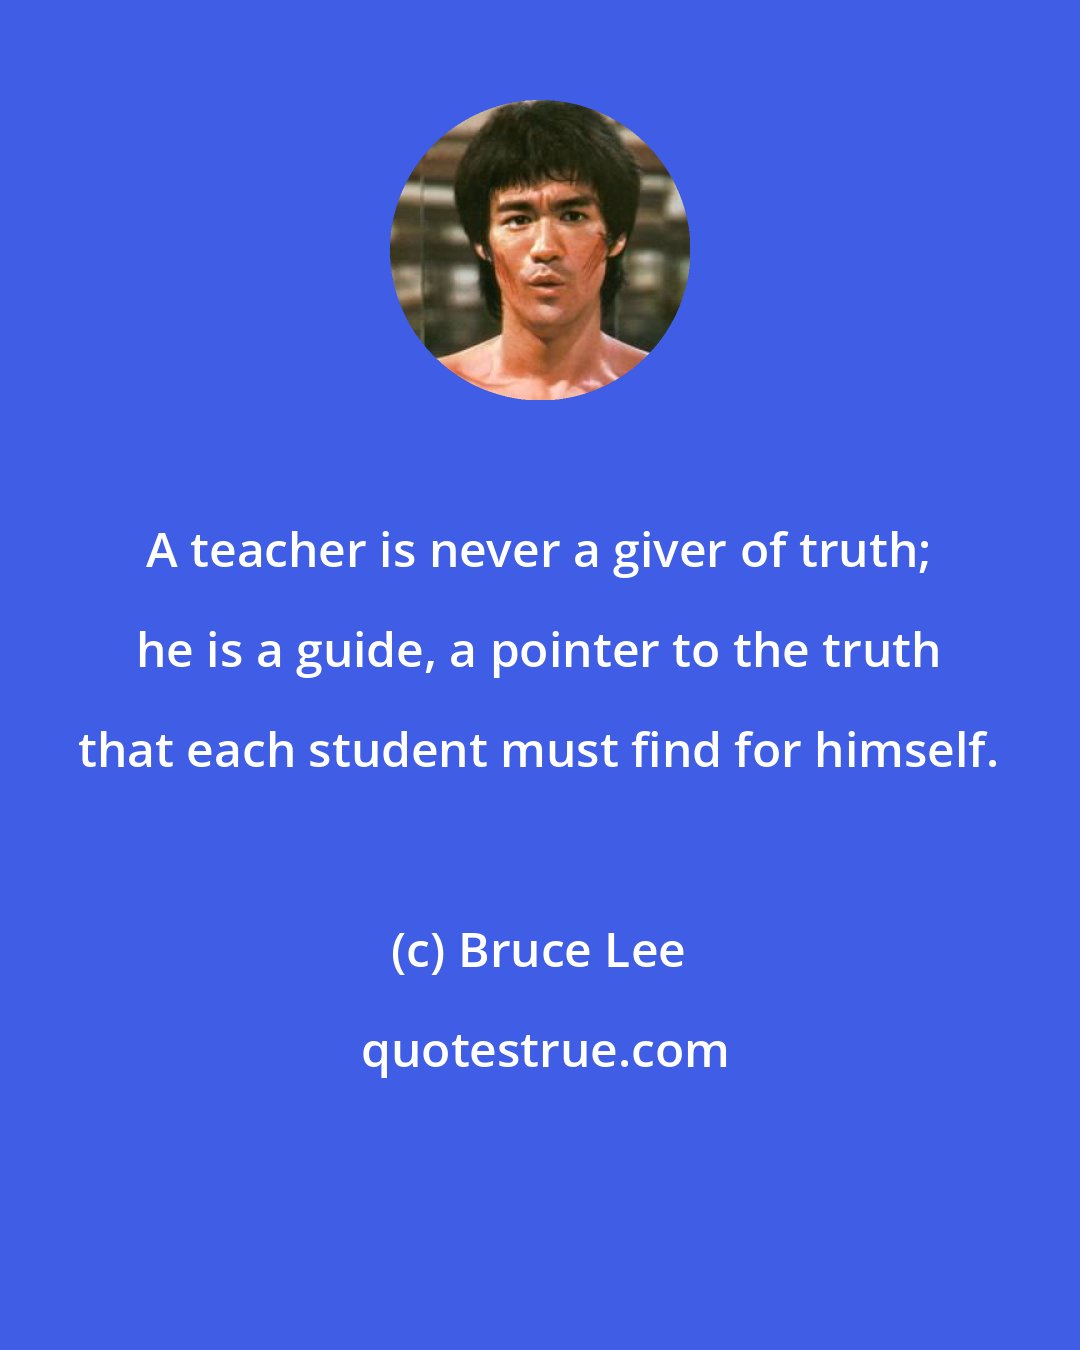 Bruce Lee: A teacher is never a giver of truth; he is a guide, a pointer to the truth that each student must find for himself.